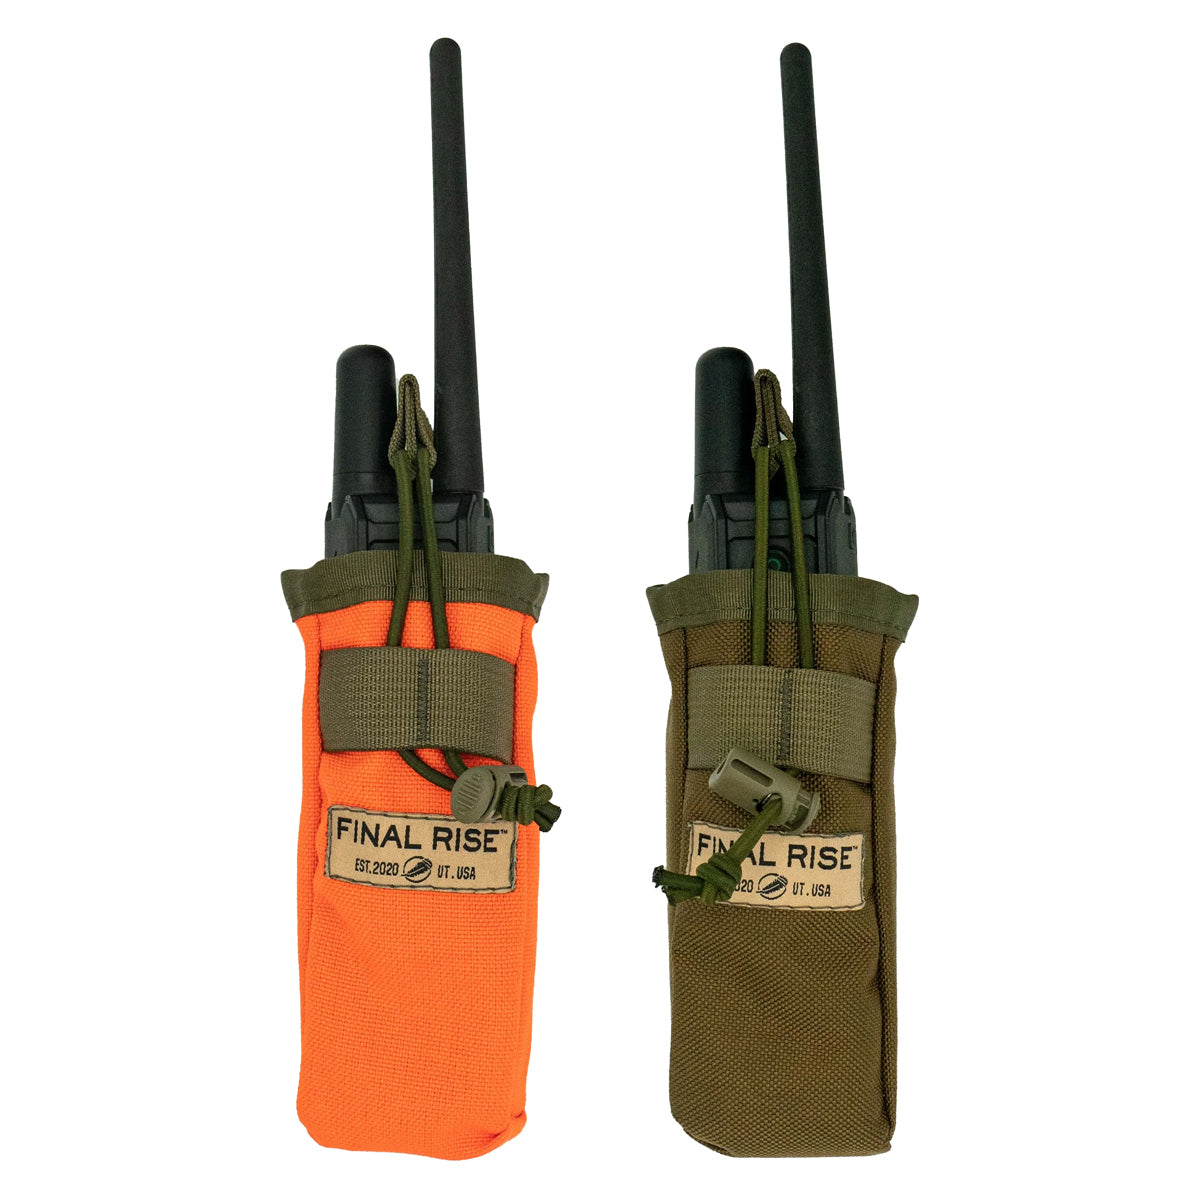 Final Rise Handheld / Accessory Pouch in  by GOHUNT | Final Rise - GOHUNT Shop